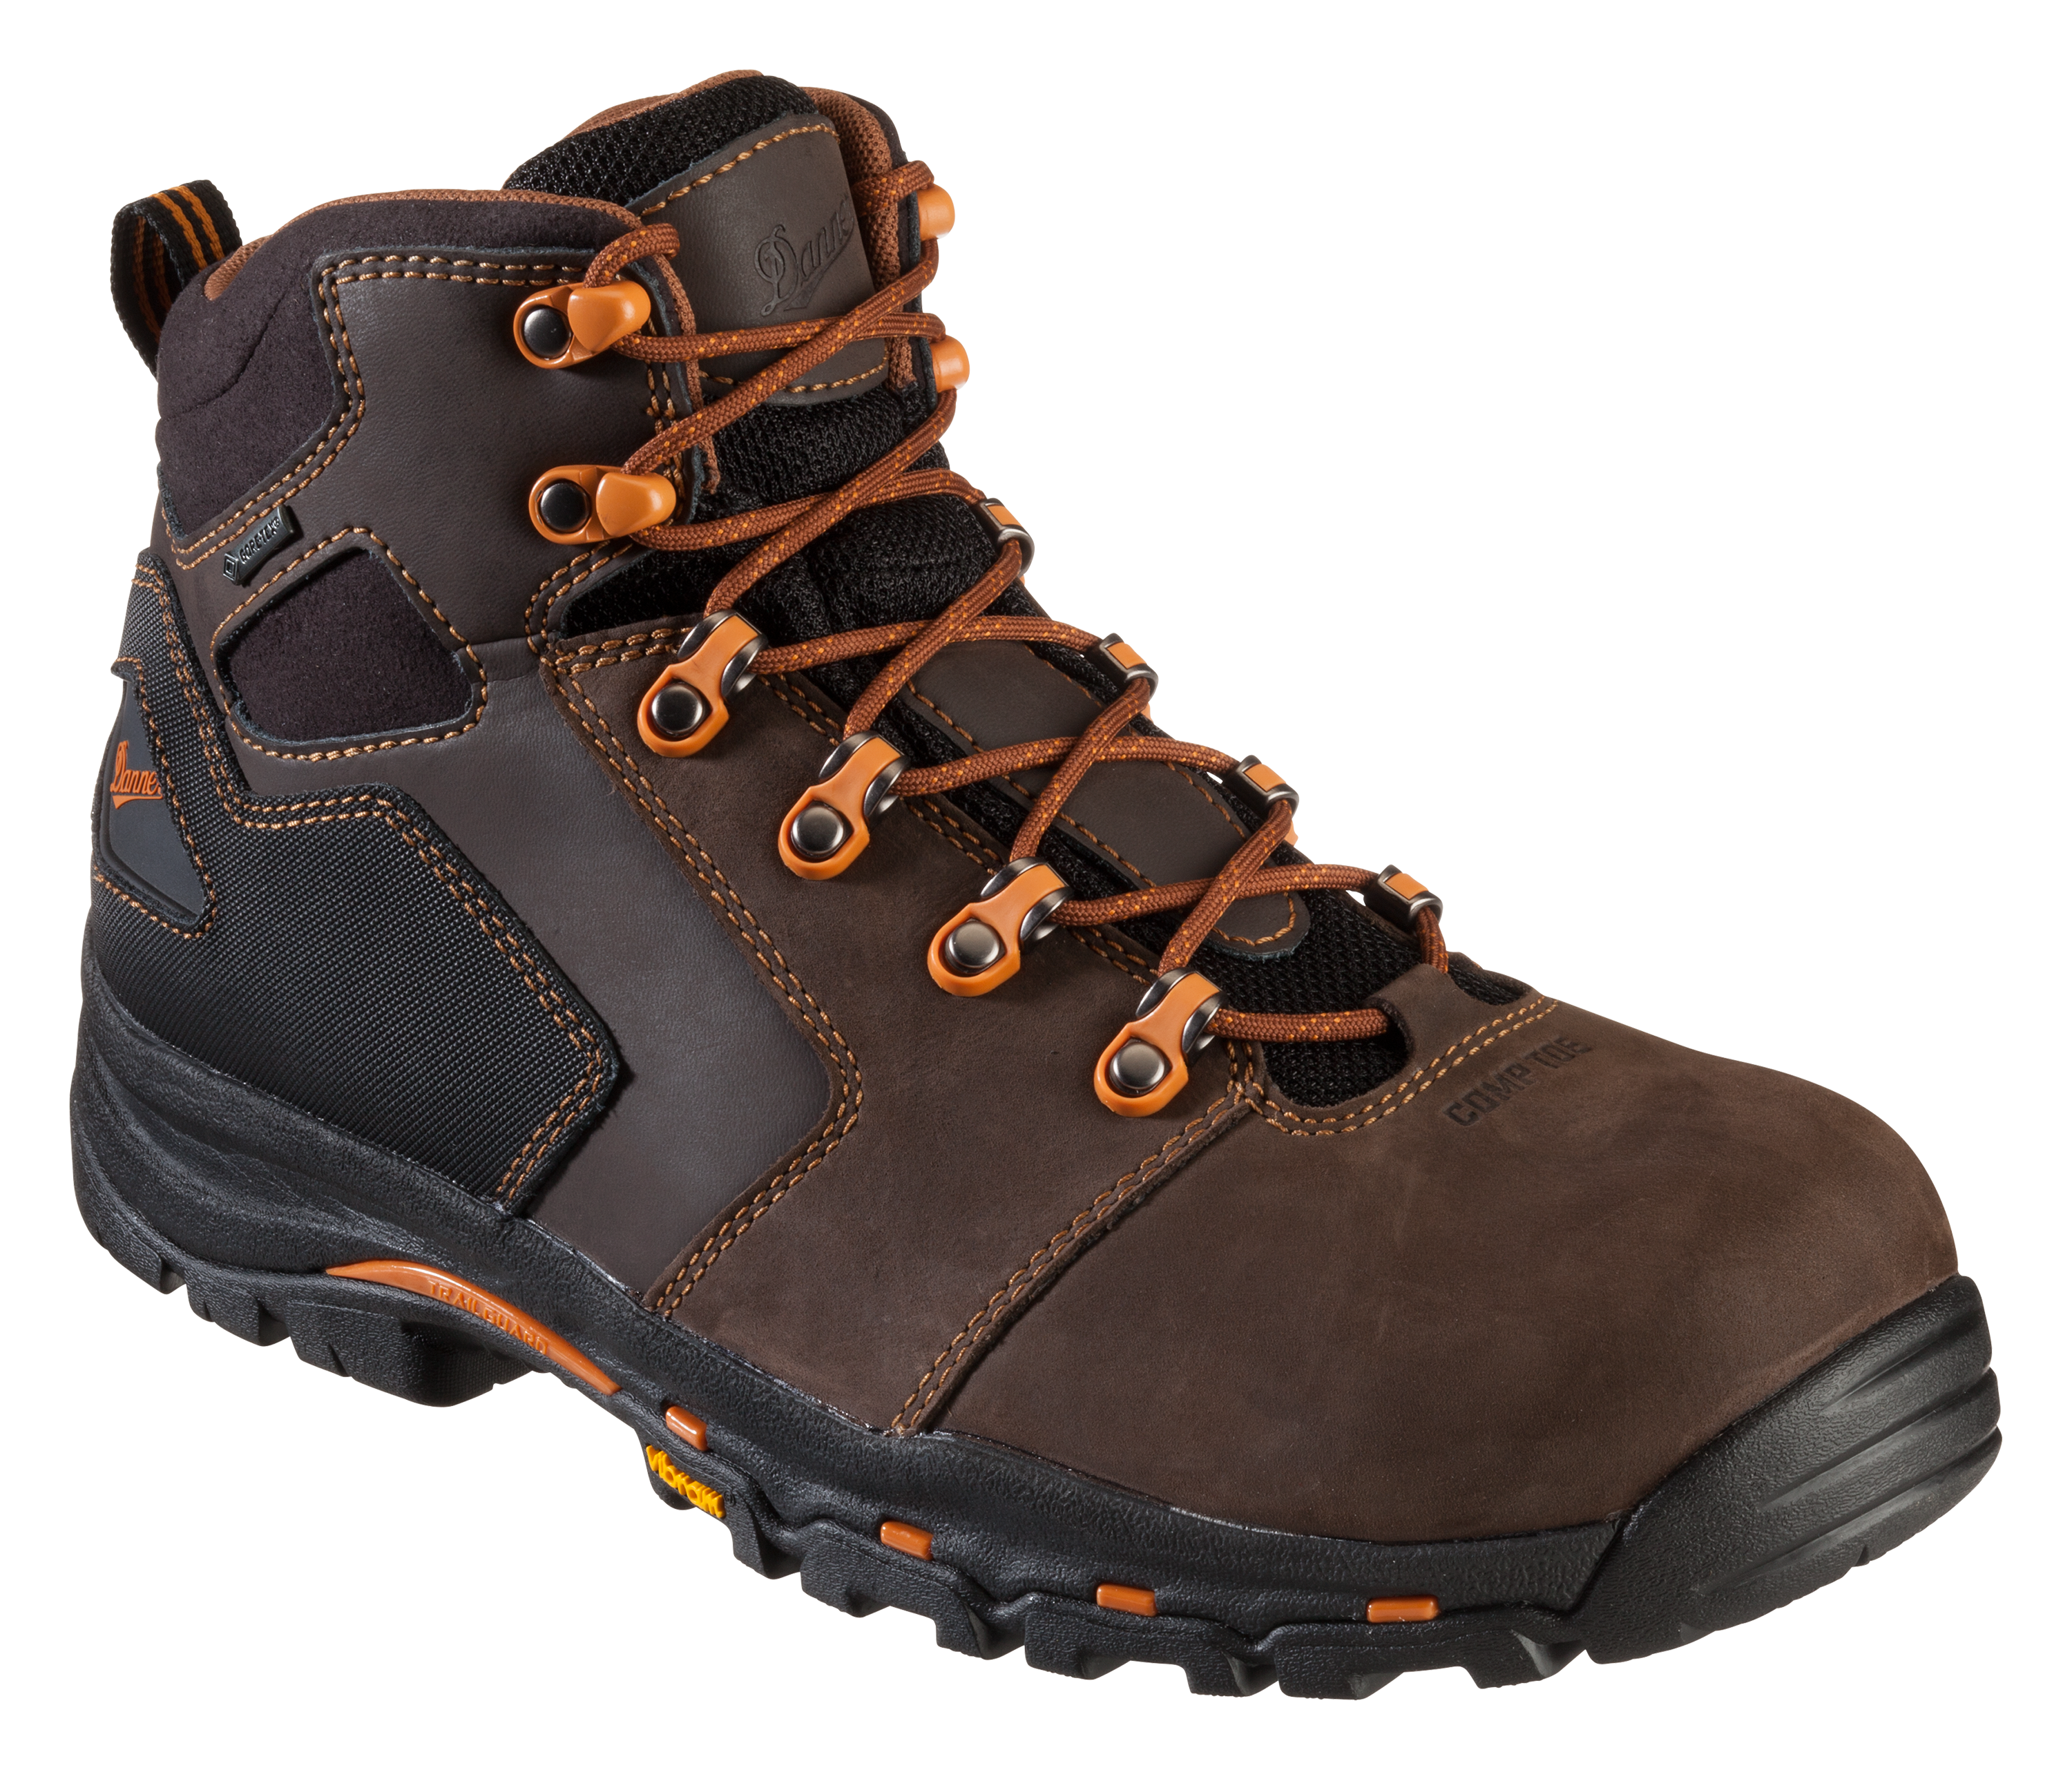 Danner Vicious GORE-TEX Non-Metallic Safety Toe Work Boots for Men - Brown - 9.5M